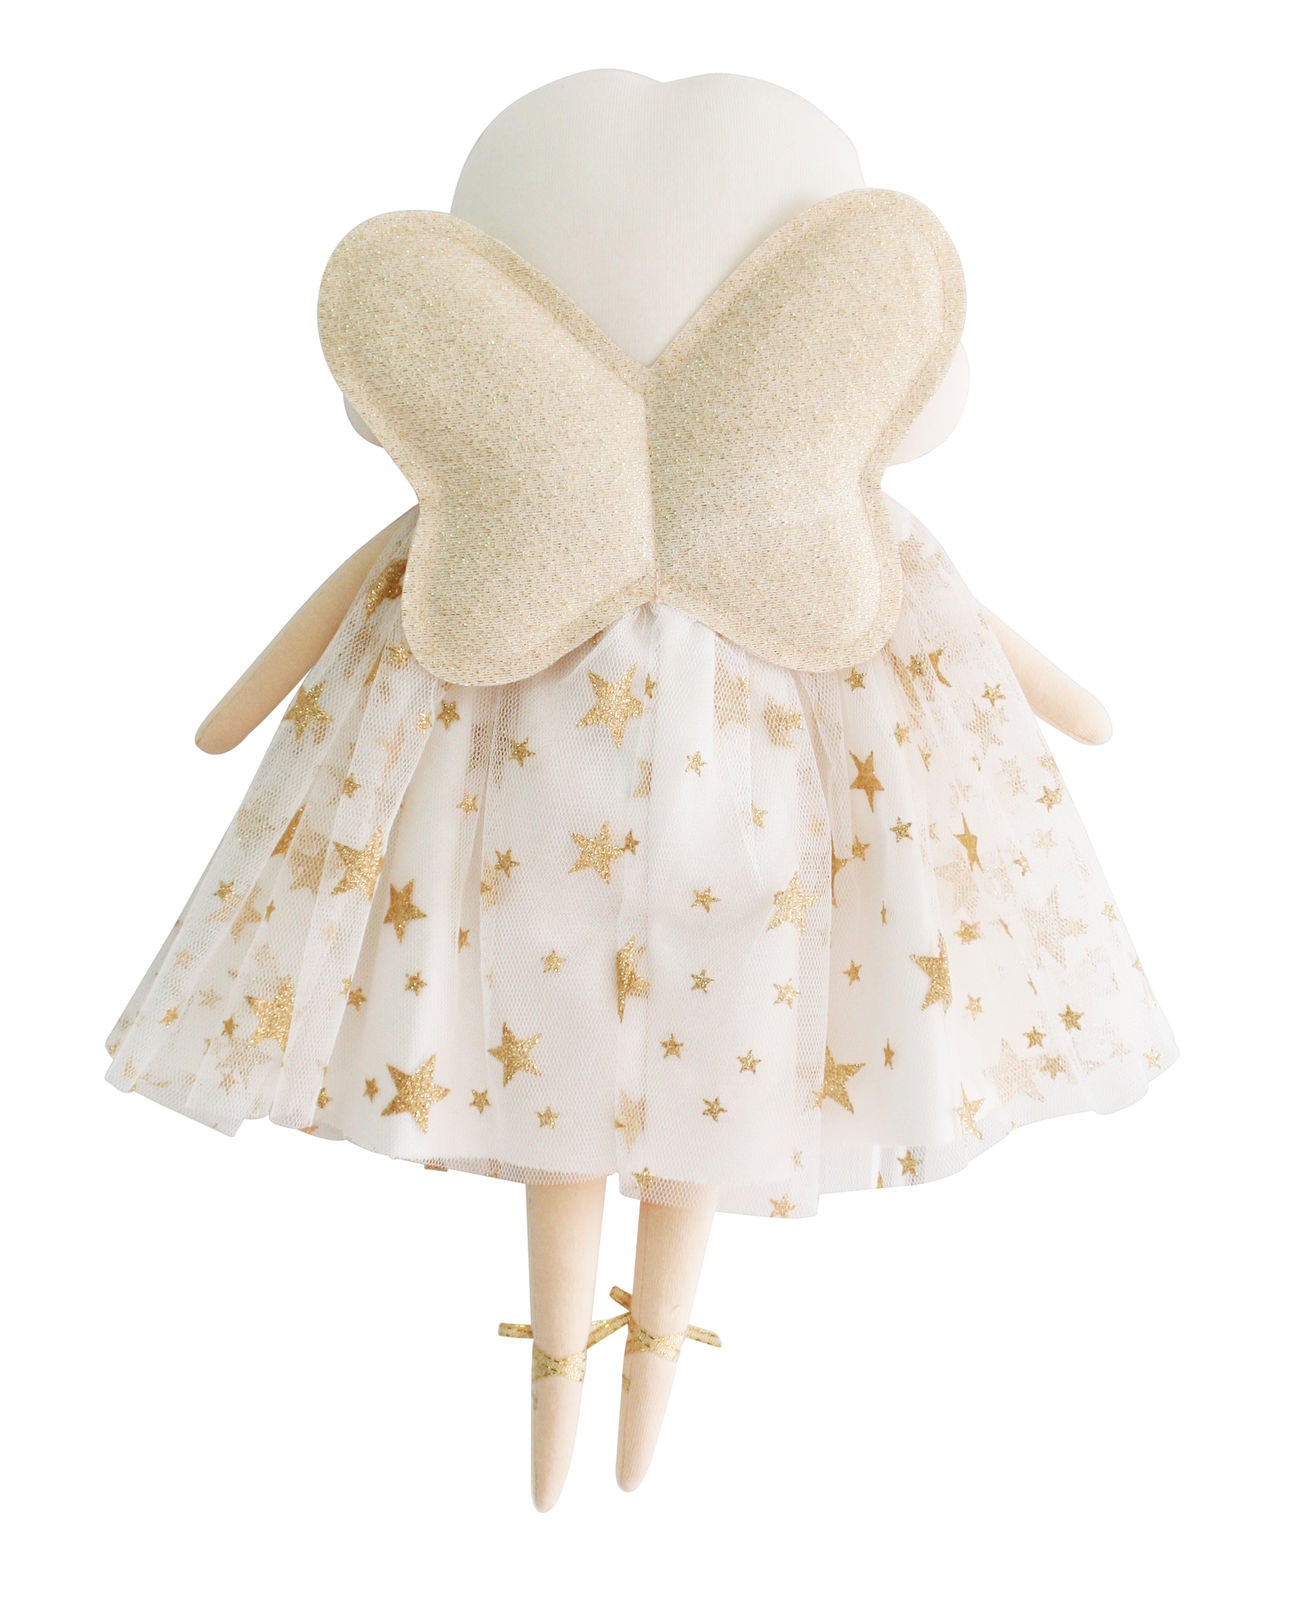 Willow Fairy Doll - Ivory Gold Star Alimrose